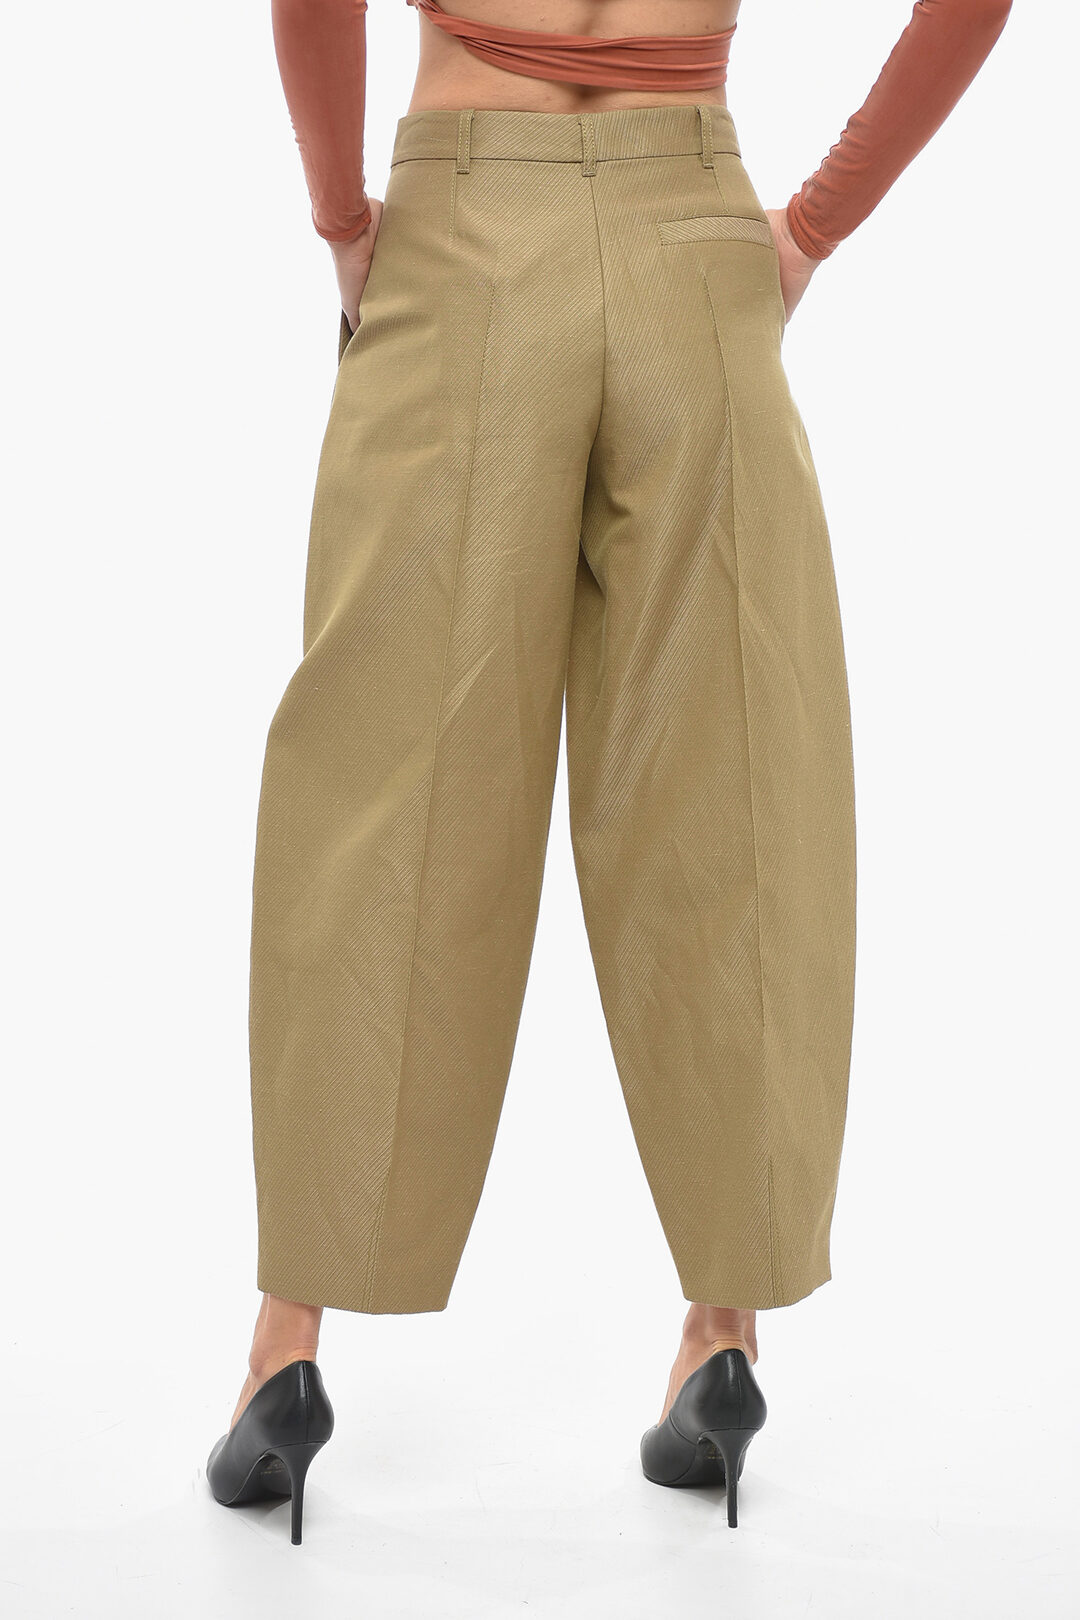 Asos Spliced Balloon Fit Trousers (28/30, 30) NEW WITH TAG | eBay